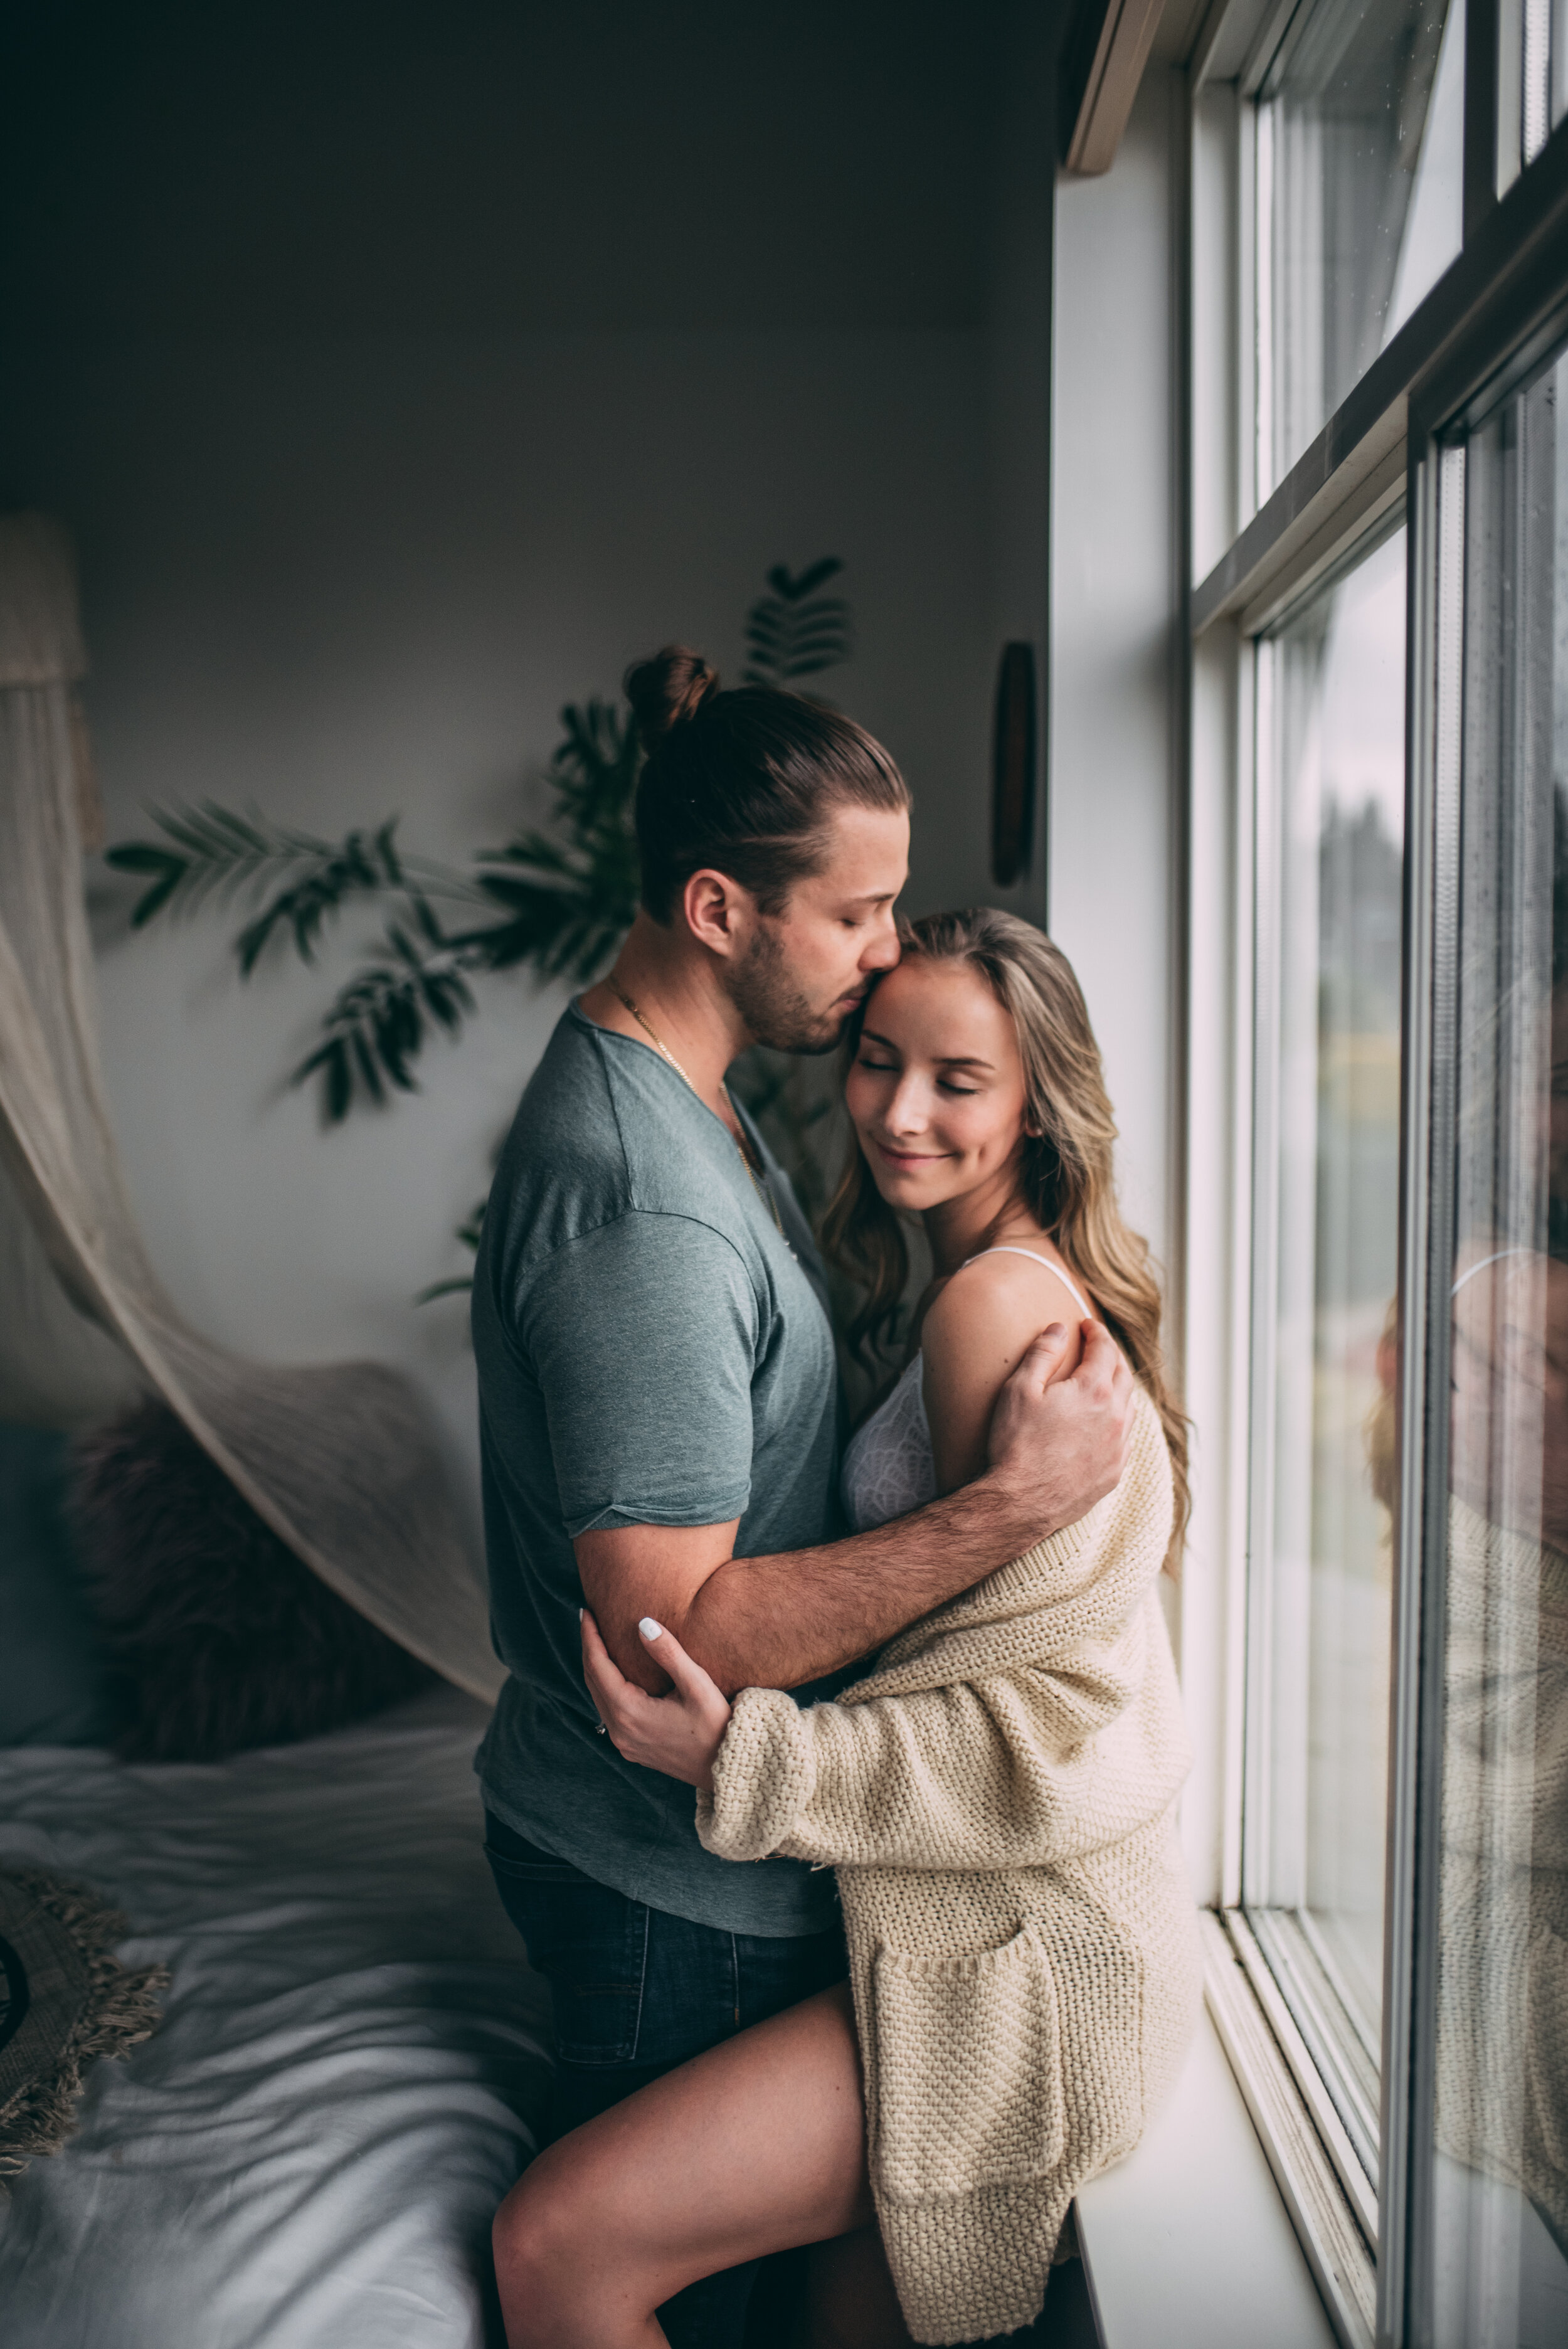 Sechelt BC Engagement Session - In Home Couples Session - Laura Olson Photography - Sunshine Coast BC & Vancouver Wedding & Elopement Photographer-5106.jpg